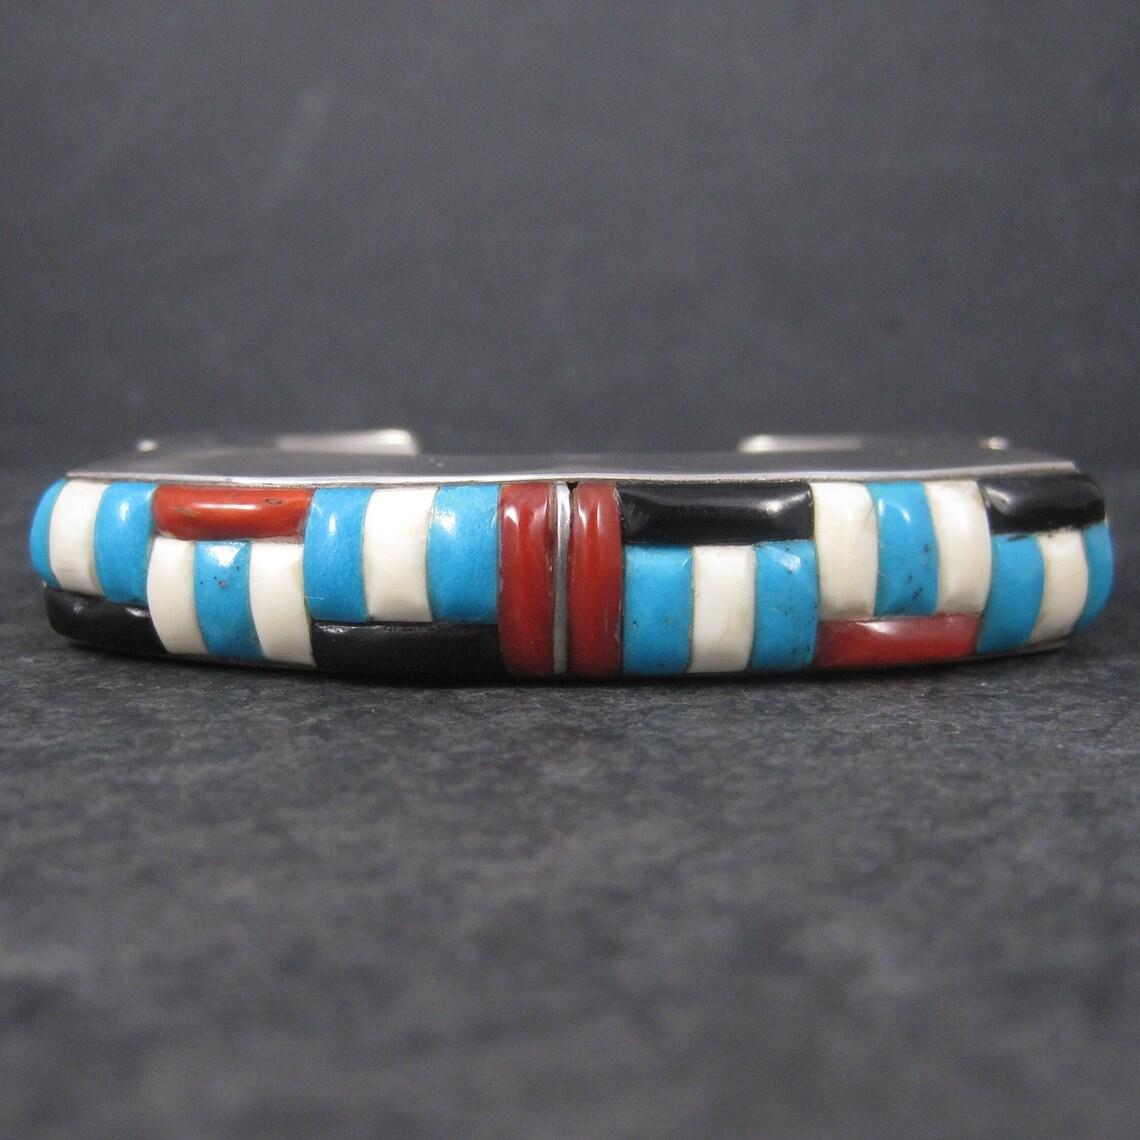 This gorgeous vintage cuff bracelet features gemstone inlay in red, white and blue with just a touch of black jet.
This piece is heavy, stunning and huge. Definitely not a bracelet for the faint of heart.

The face of this bracelet measures 1/2 of